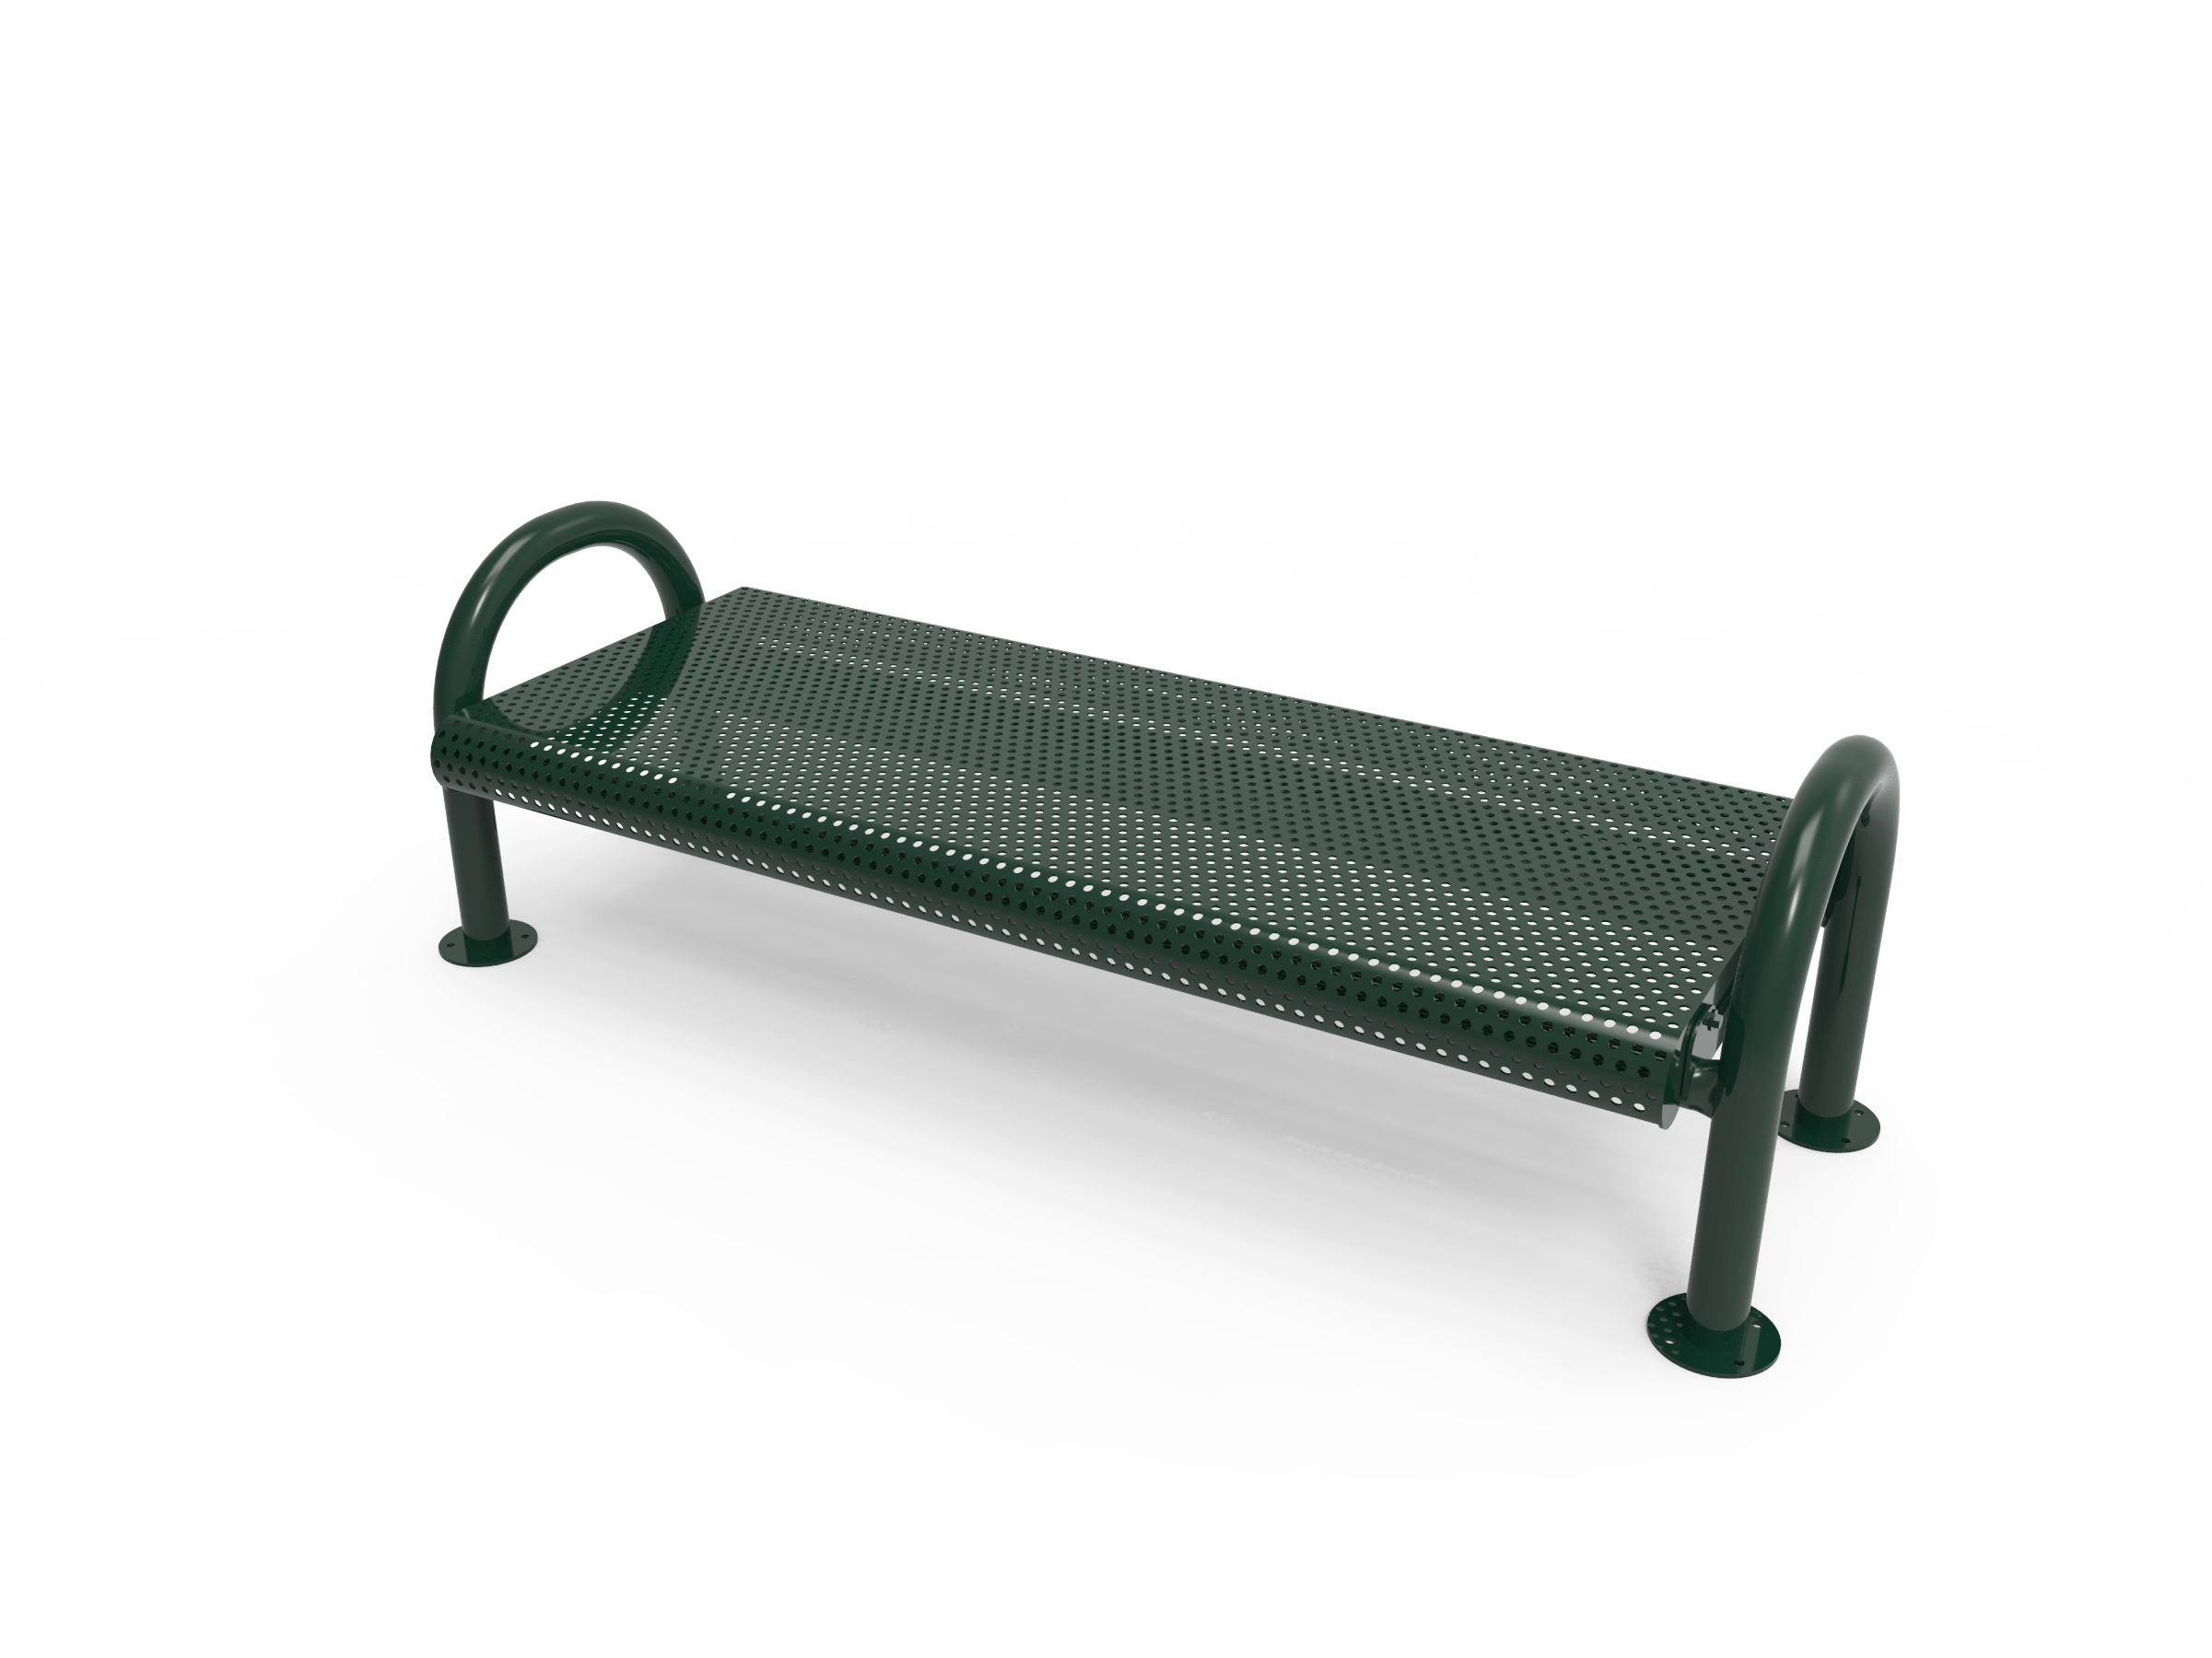 4′ Bench Without Back Surface-Punched
BMD04-D-60-000
Industry Standard Finish
$1059.00
BMD04-B-60-000
Advantage Premium Finish
$1319.00
